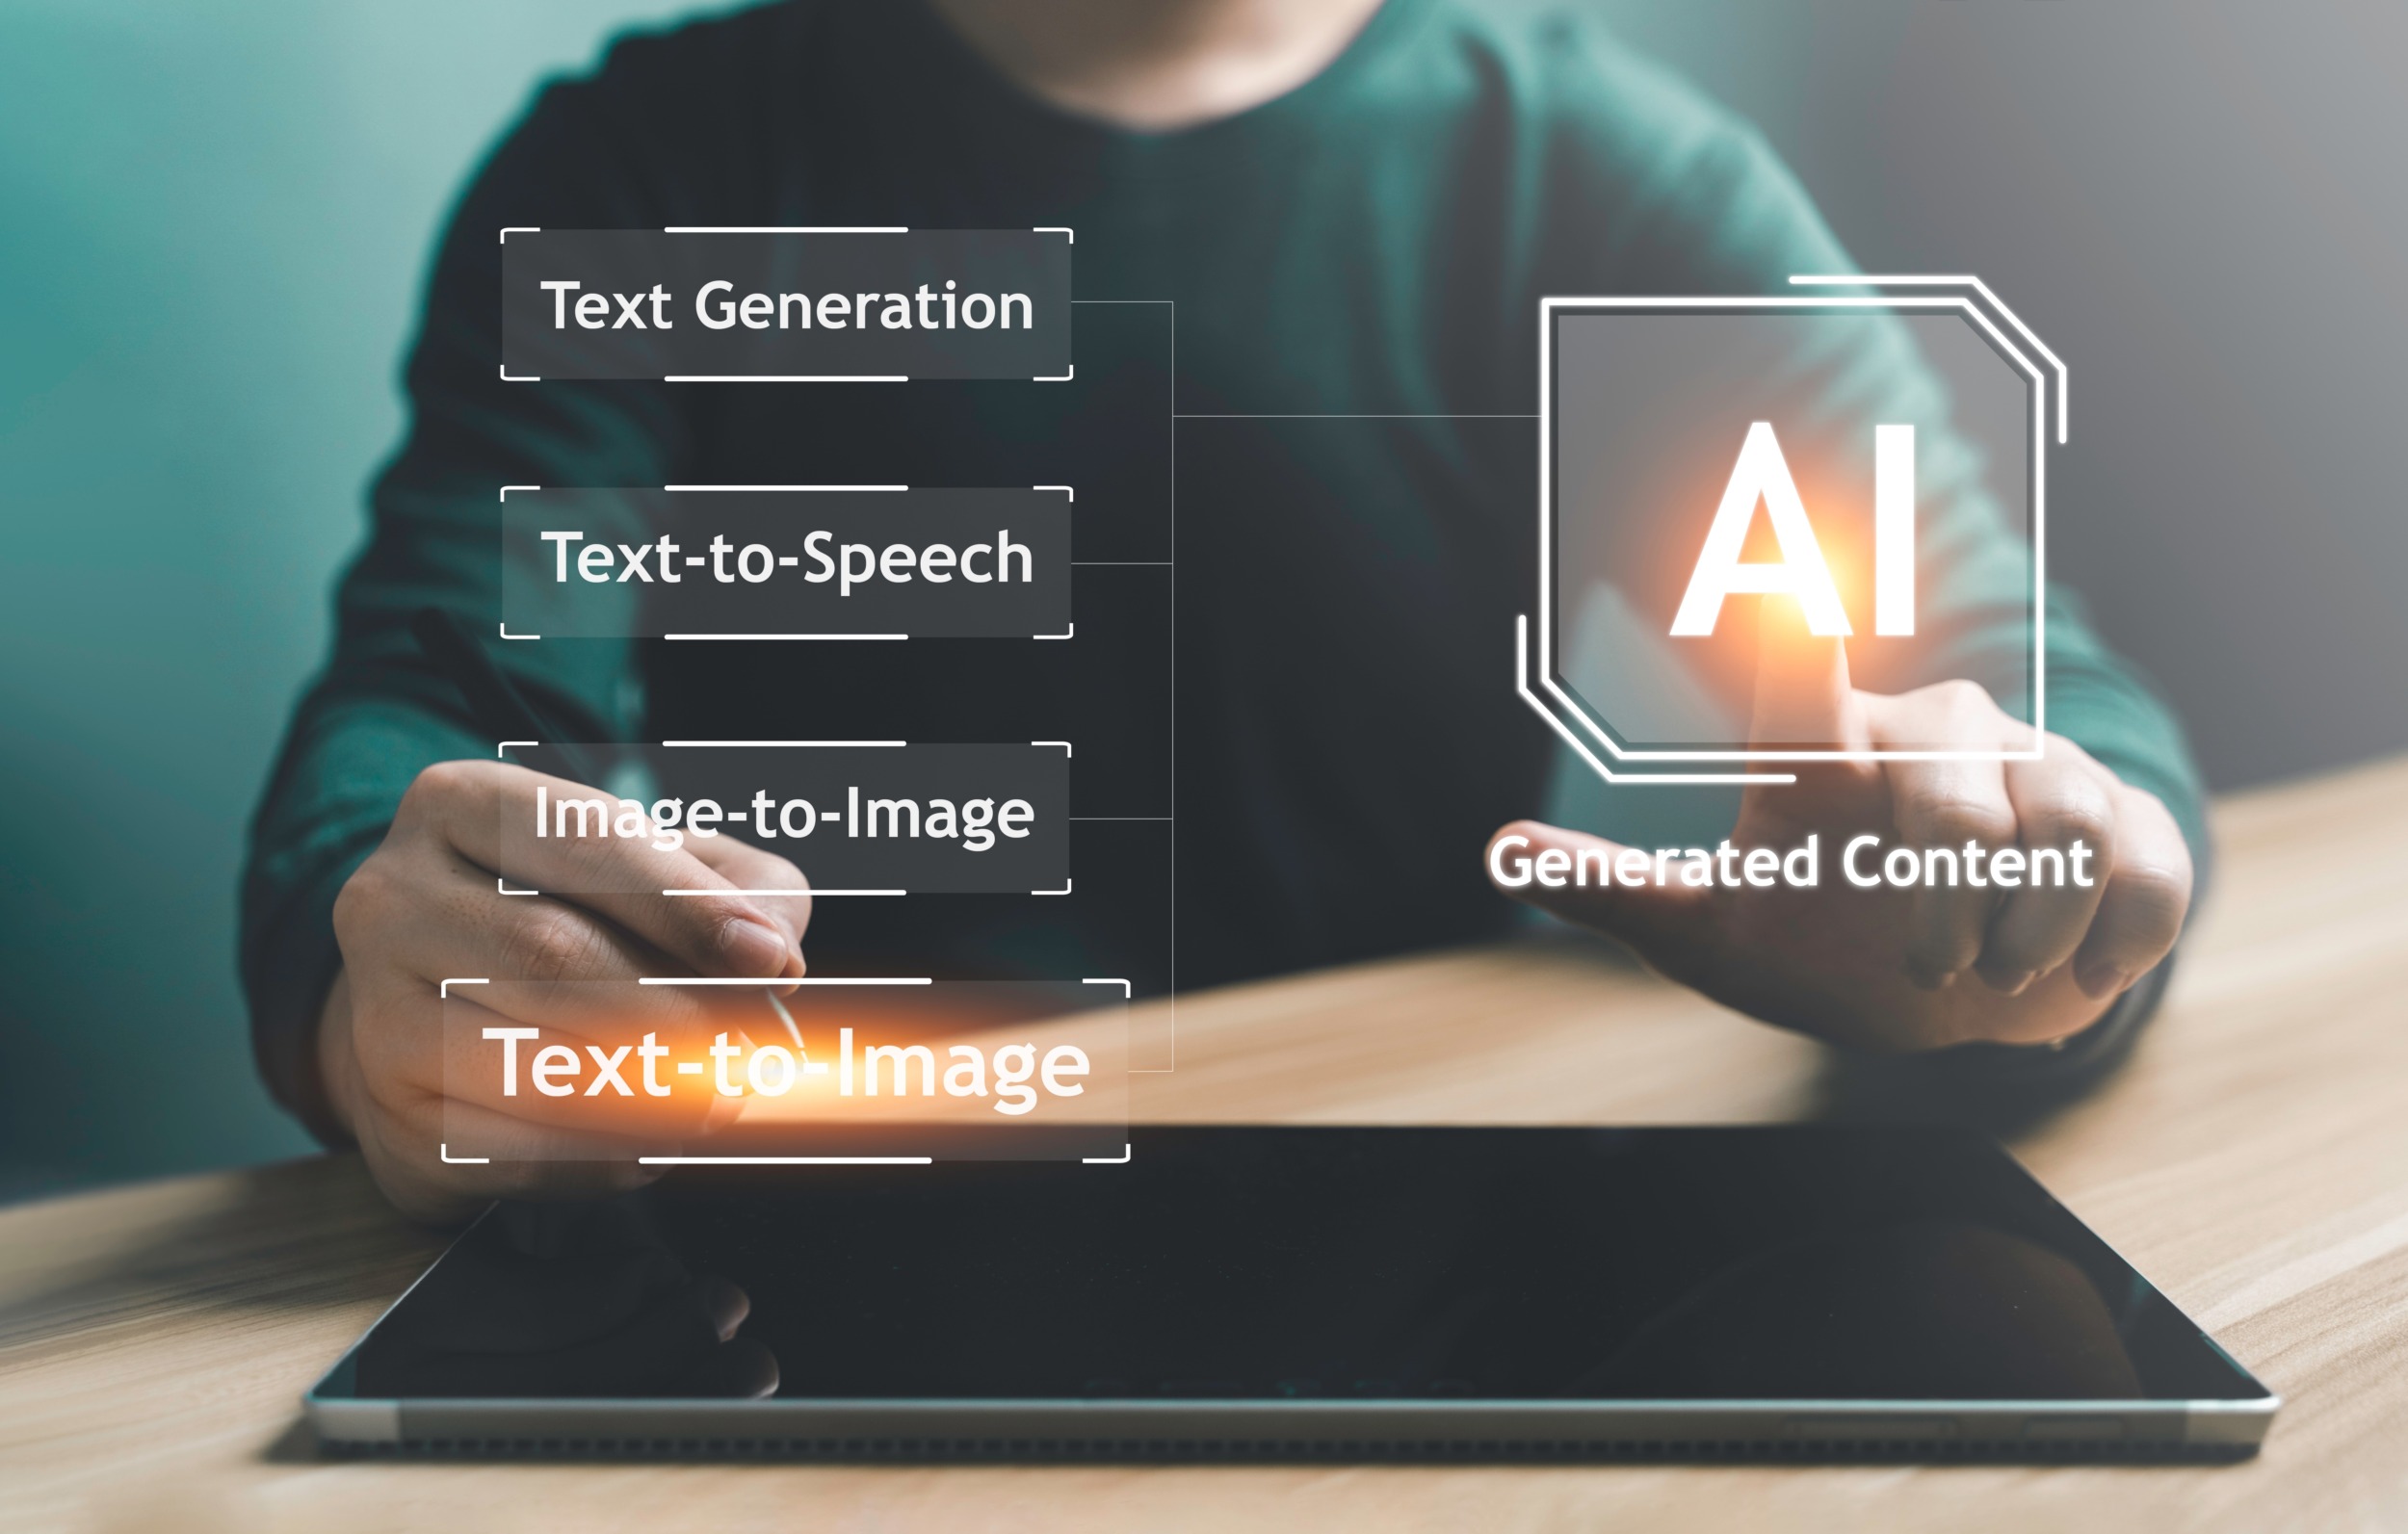 generative AI & education: closeup of person in dark top sitting at keyboard facing camera with overlay of text listing types of generative AI: text-to-text; text-to-image, etc.